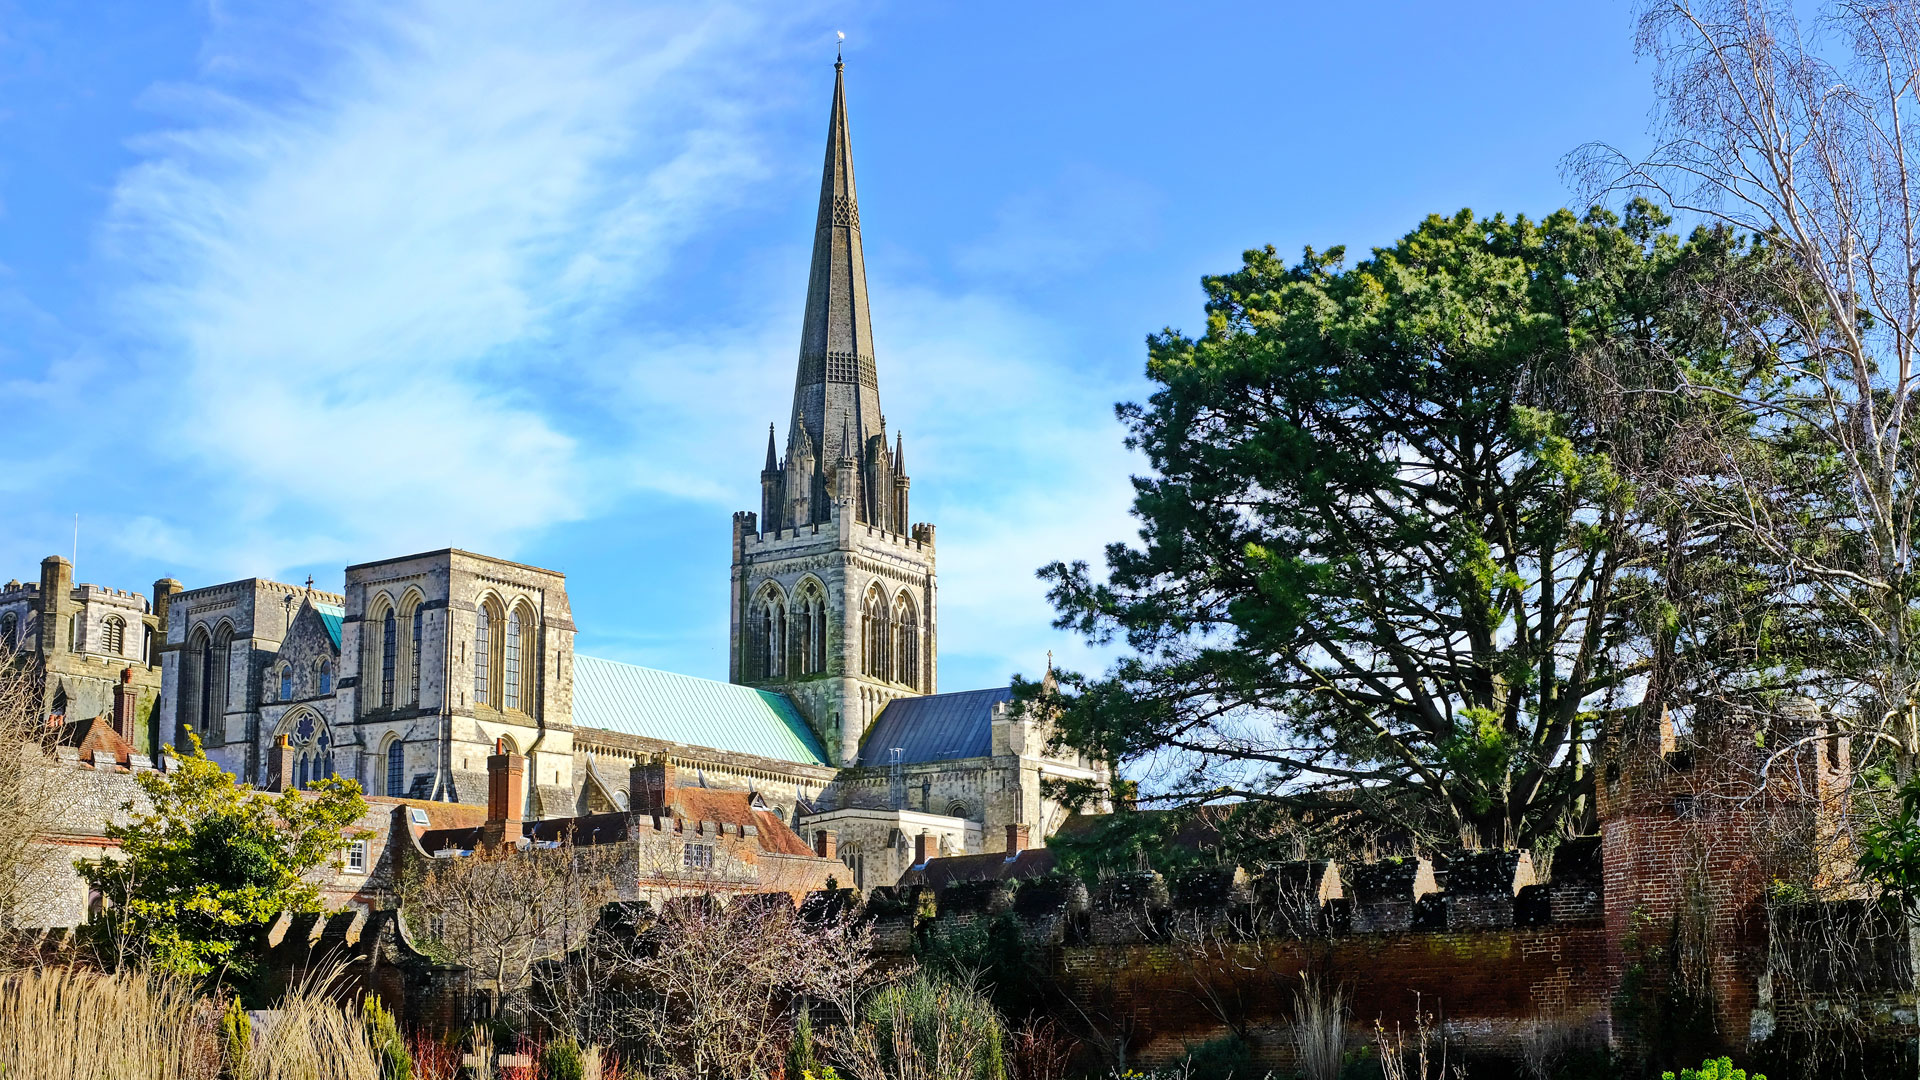 Chichester Catehdral